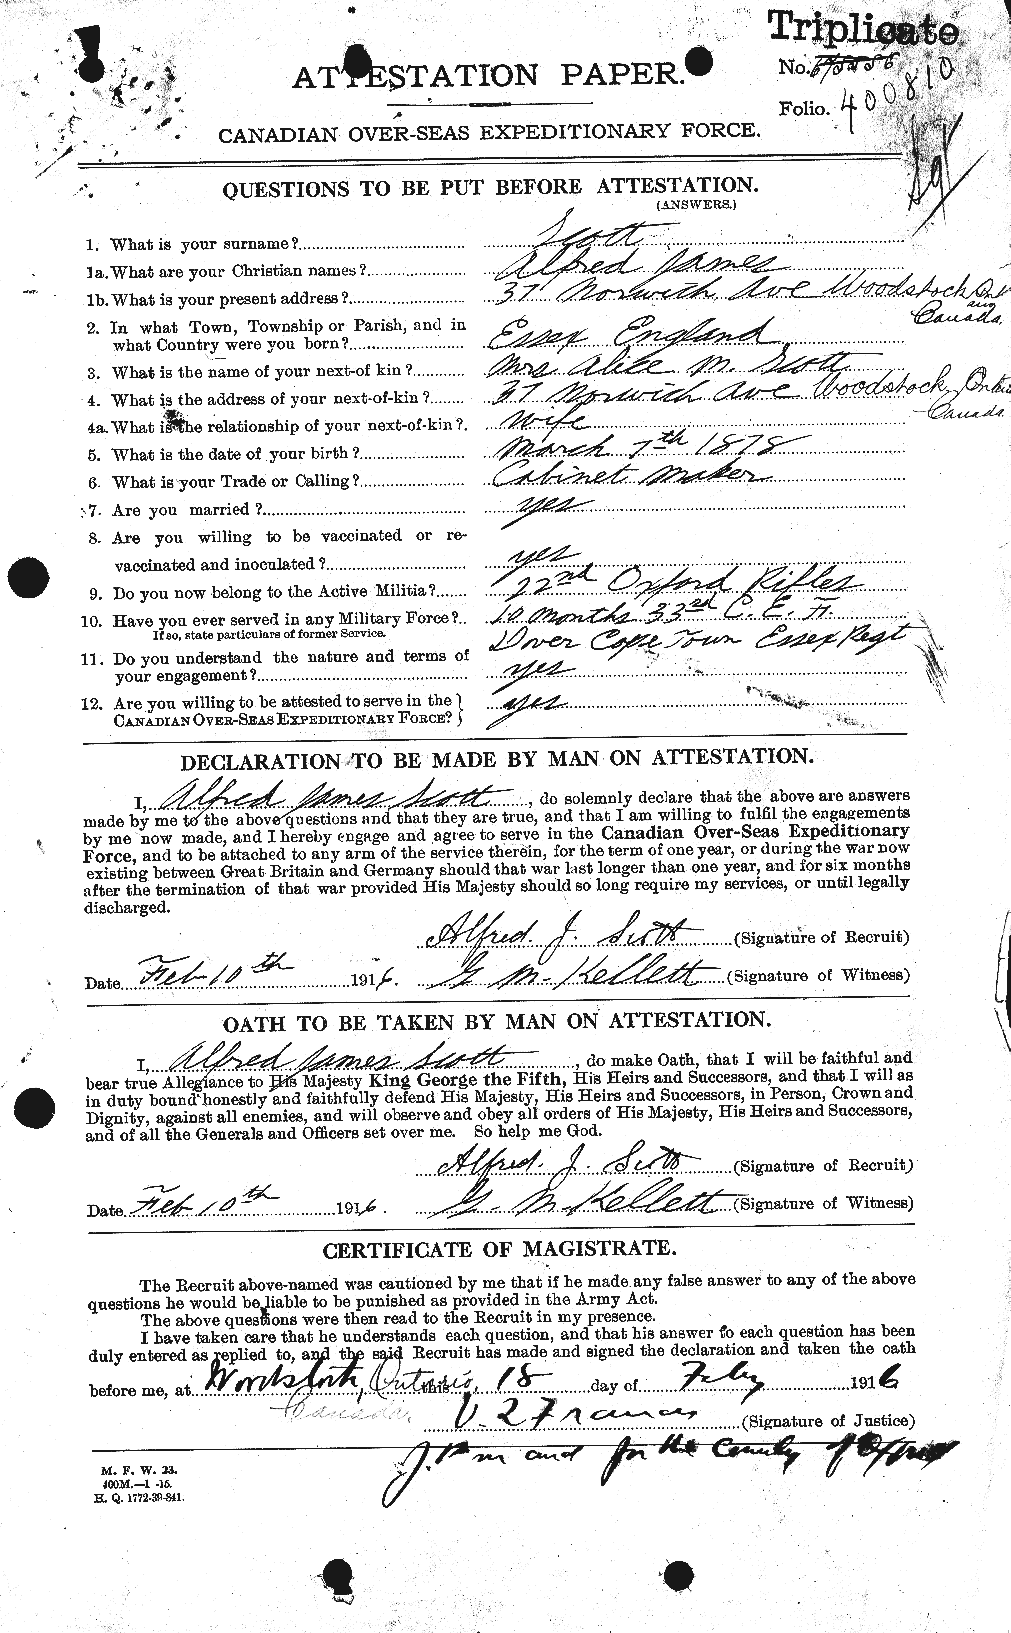 Personnel Records of the First World War - CEF 086581a